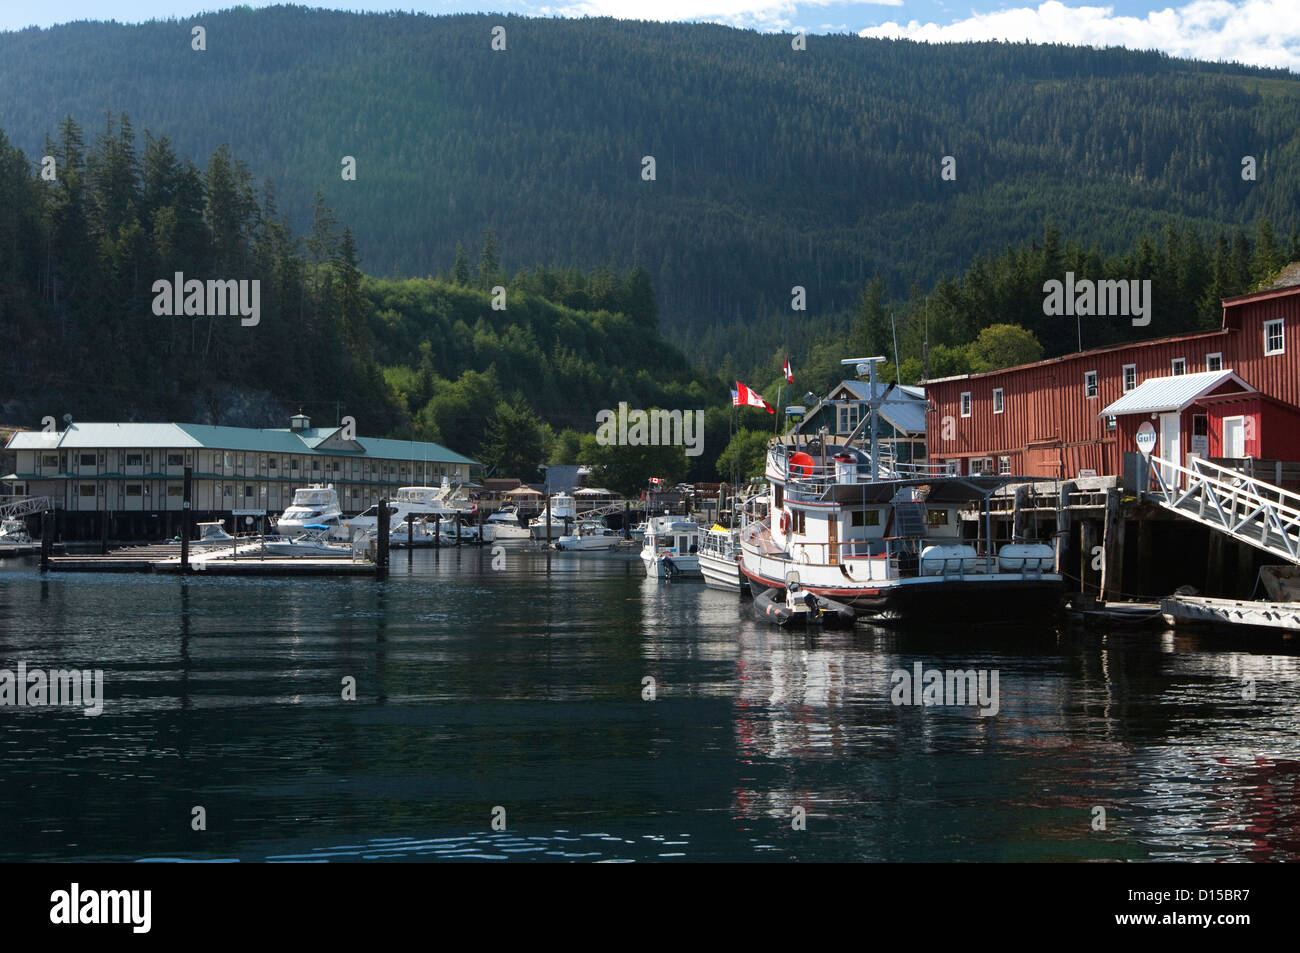 Telegraph Cove, located in Vancouver Island, British Columbia, Canada, is a major hub for whale watching and sea kayaking. Stock Photo